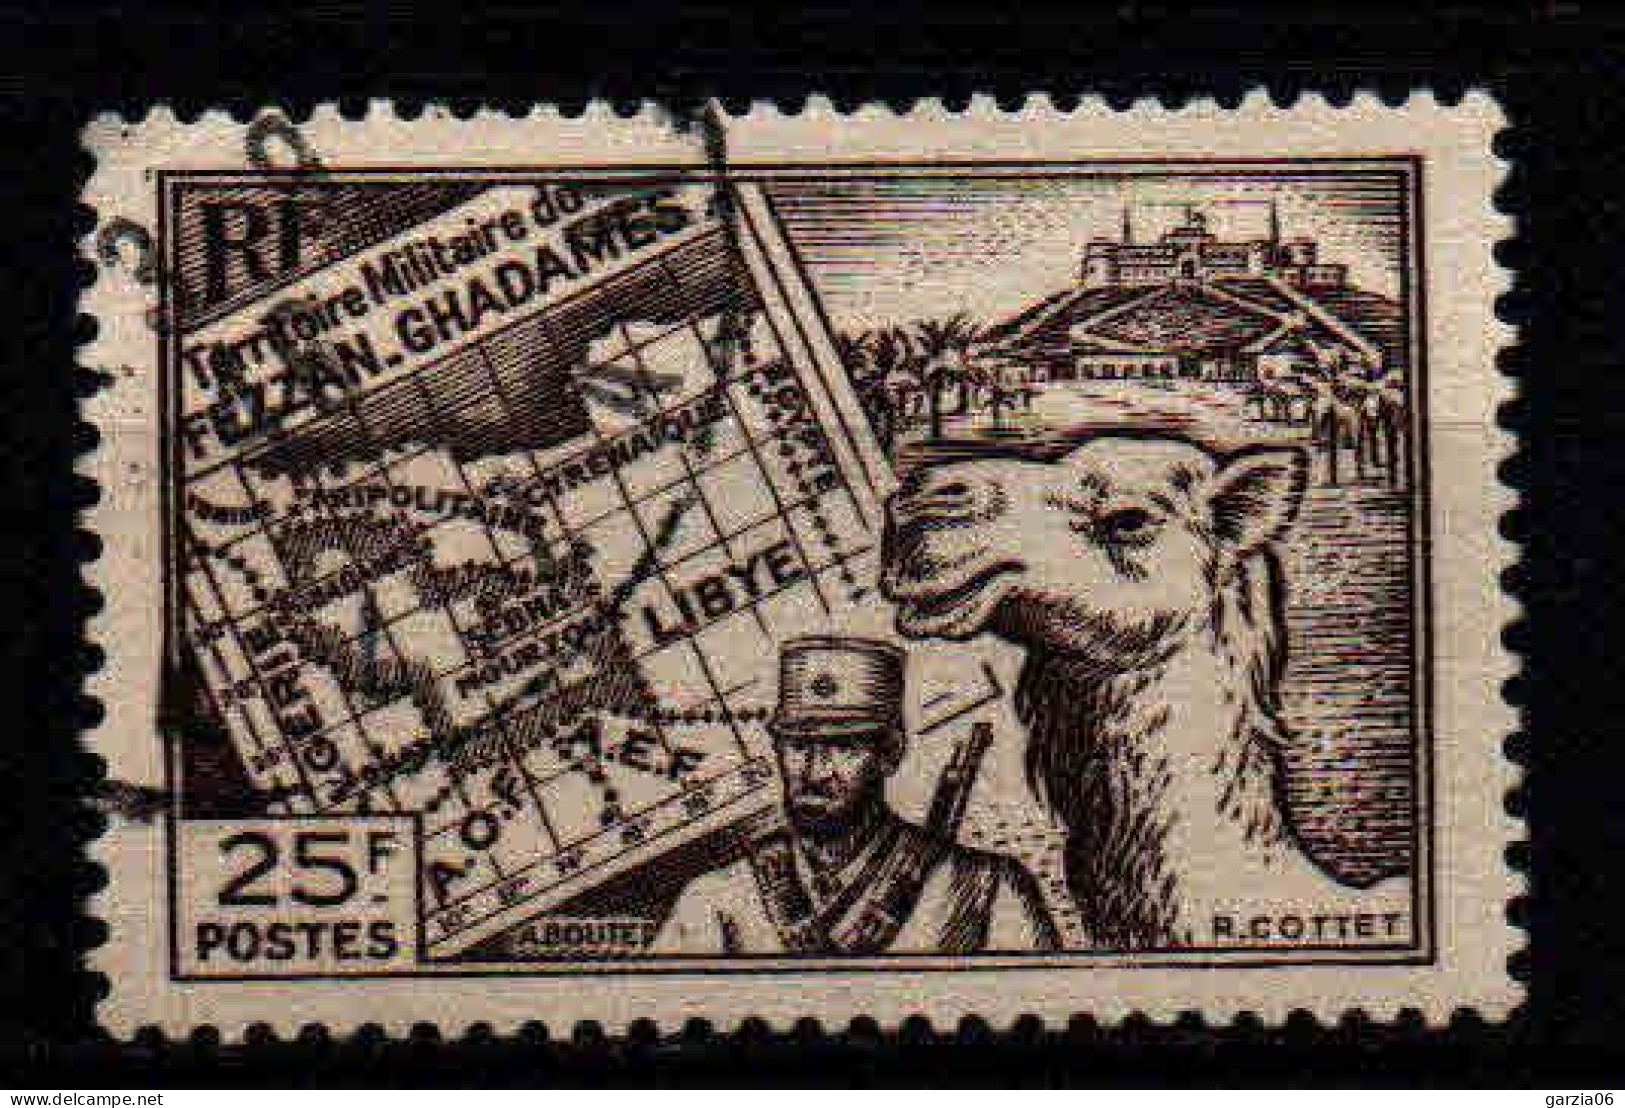 Fezzan  - 1946 -  Carte  -   N° 40  - Oblit - Used - Used Stamps